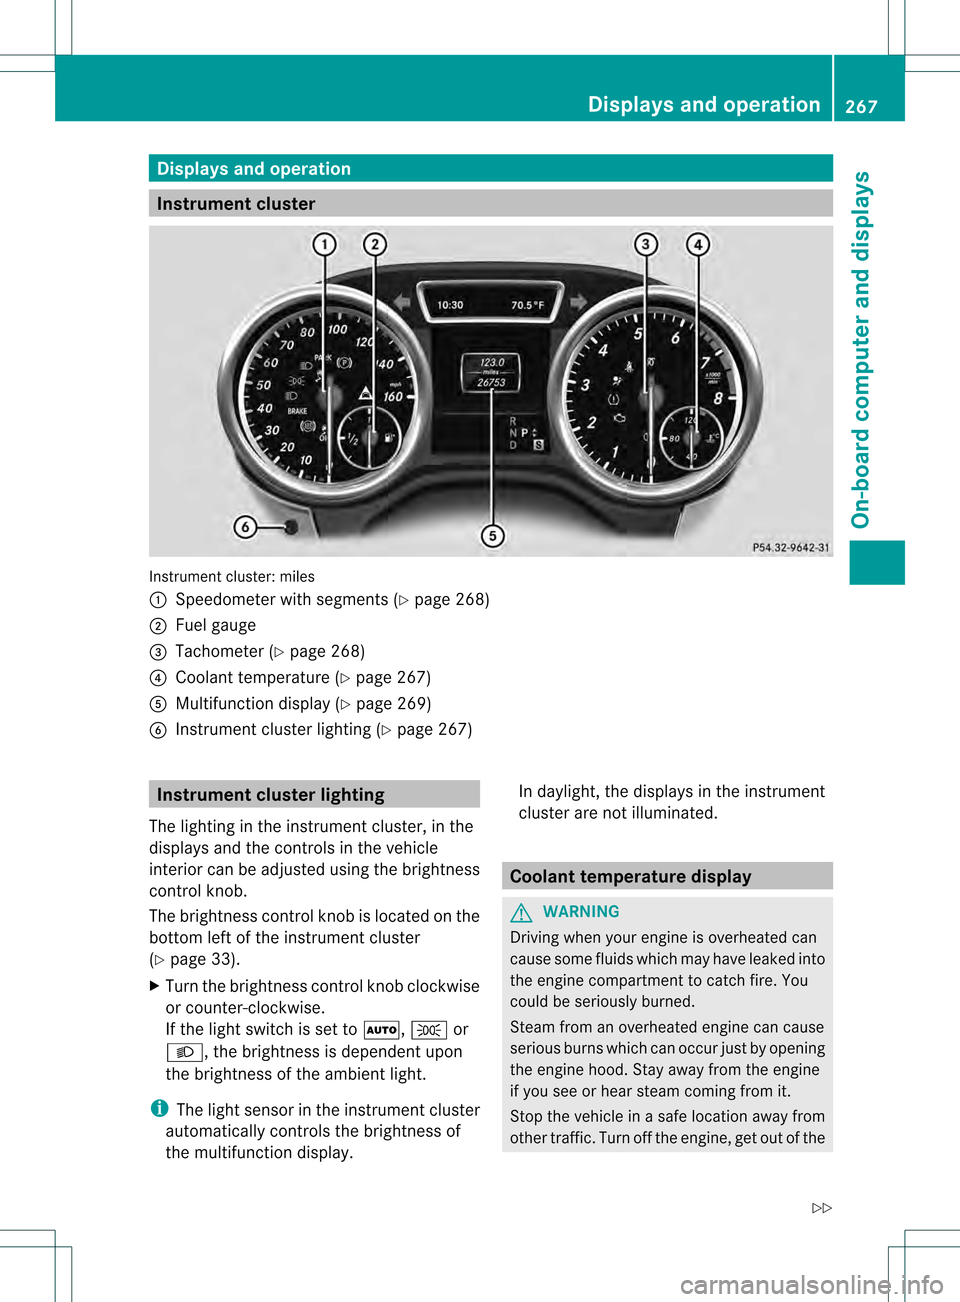 MERCEDES-BENZ GL-Class 2013 X166 Owners Manual Displays and operation
Instrument cluster
Instrument cluster: miles
0002
Speedometer with segments (Y page 268)
0003 Fuel gauge
0021 Tachometer (Y page 268)
0020 Coolant temperature ( Ypage 267)
001E 